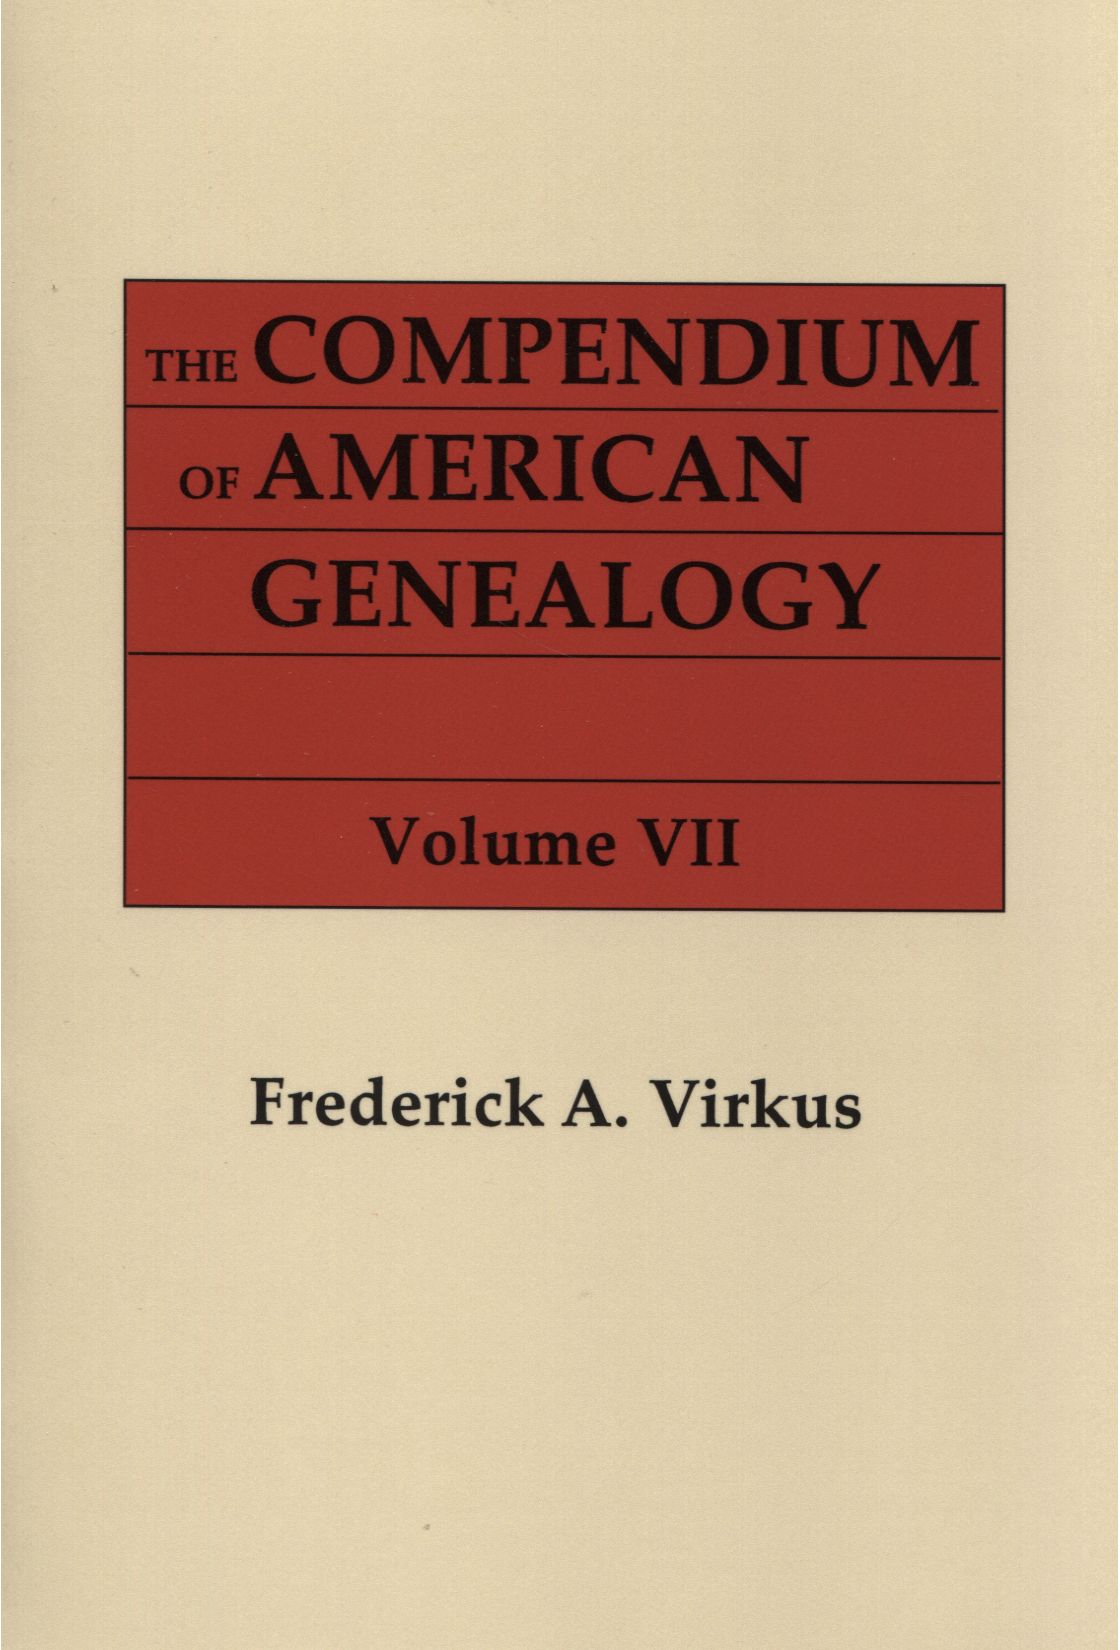 The Compendium of American Genealogy: First Families of America. A Genealogical Encyclopedia of the United States. Volume VII